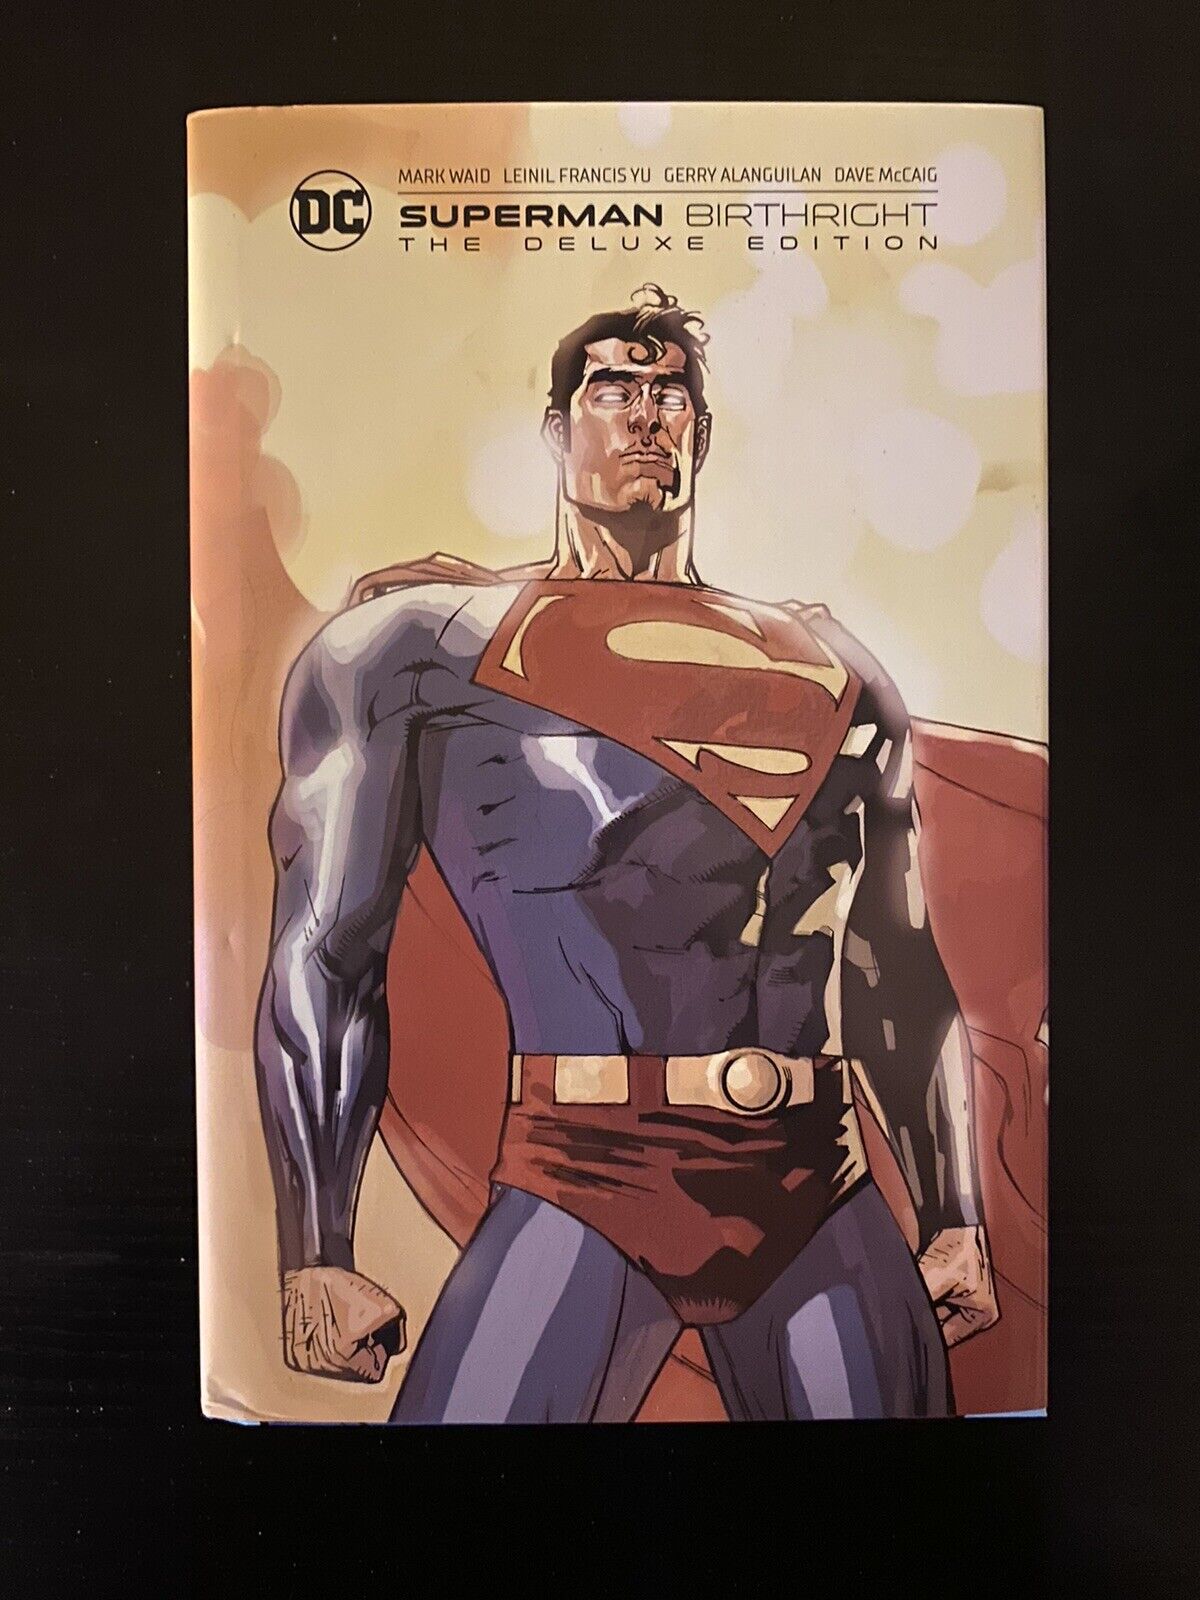 Superman: Birthright The Deluxe Edition by Waid, Mark [Hardcover]